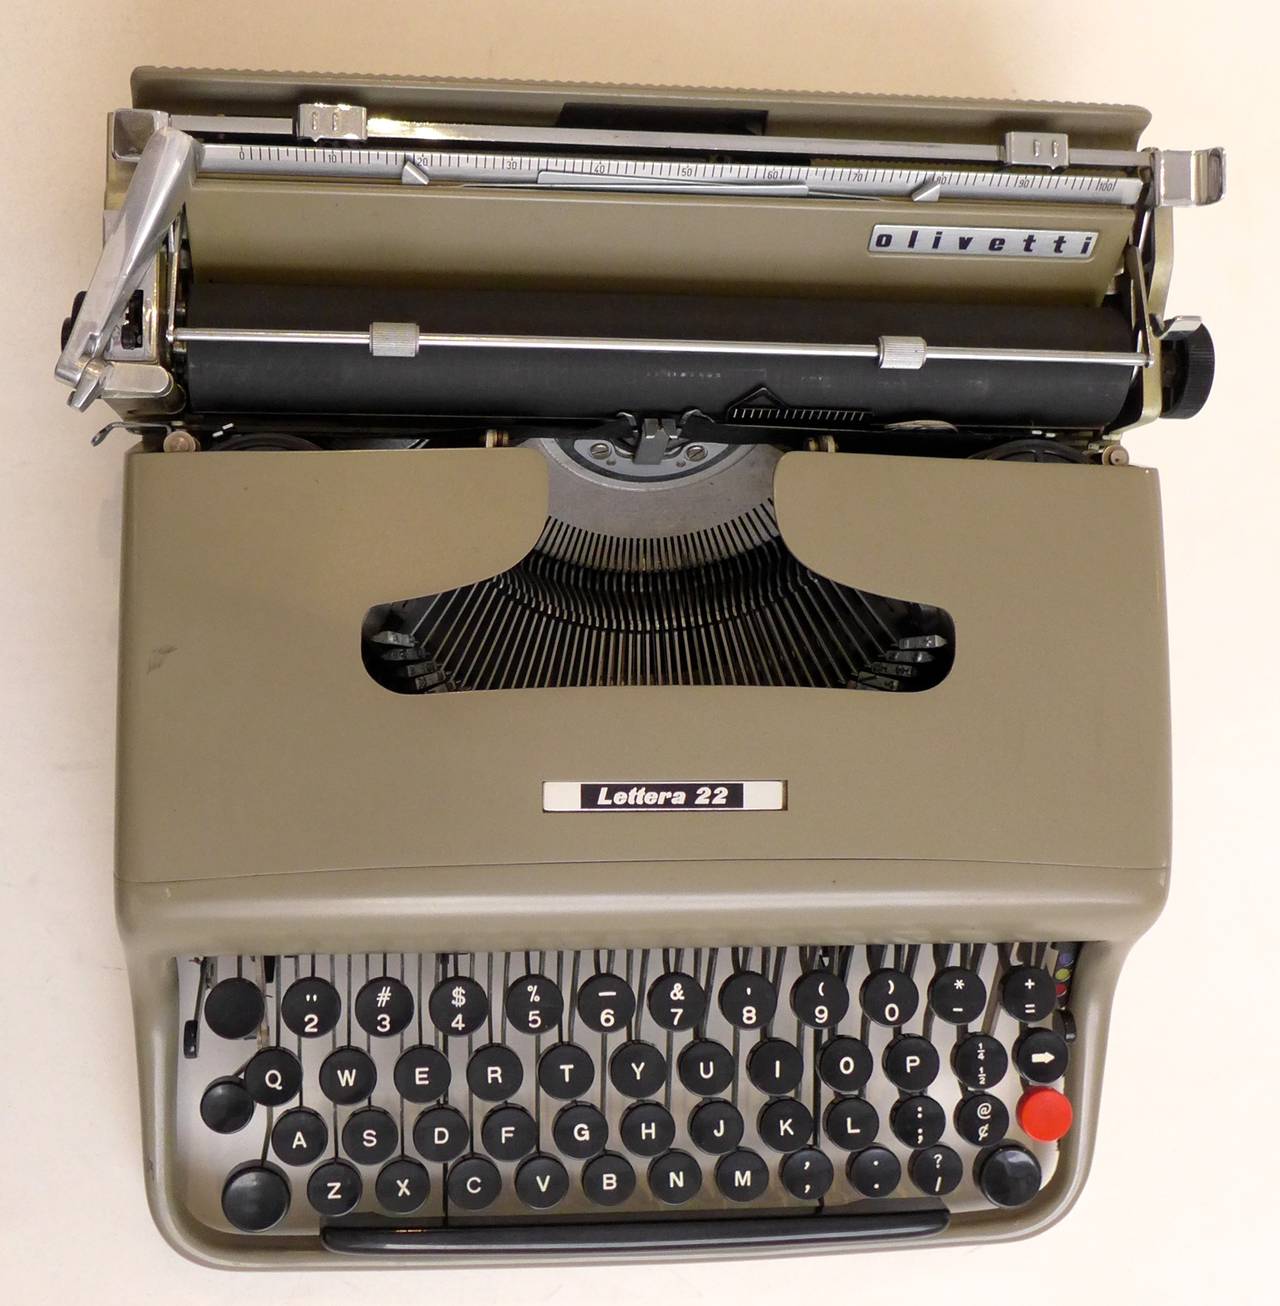 Lettera 22 portable typewriter, of enameled metal and plastic, designed by Marcello Nizzoli and produced by the progressive manufacturer Olivetti in Italy, circa 1954. Nizzoli (1887-1969), a painter, graphic artist, and architect was Olivetti's